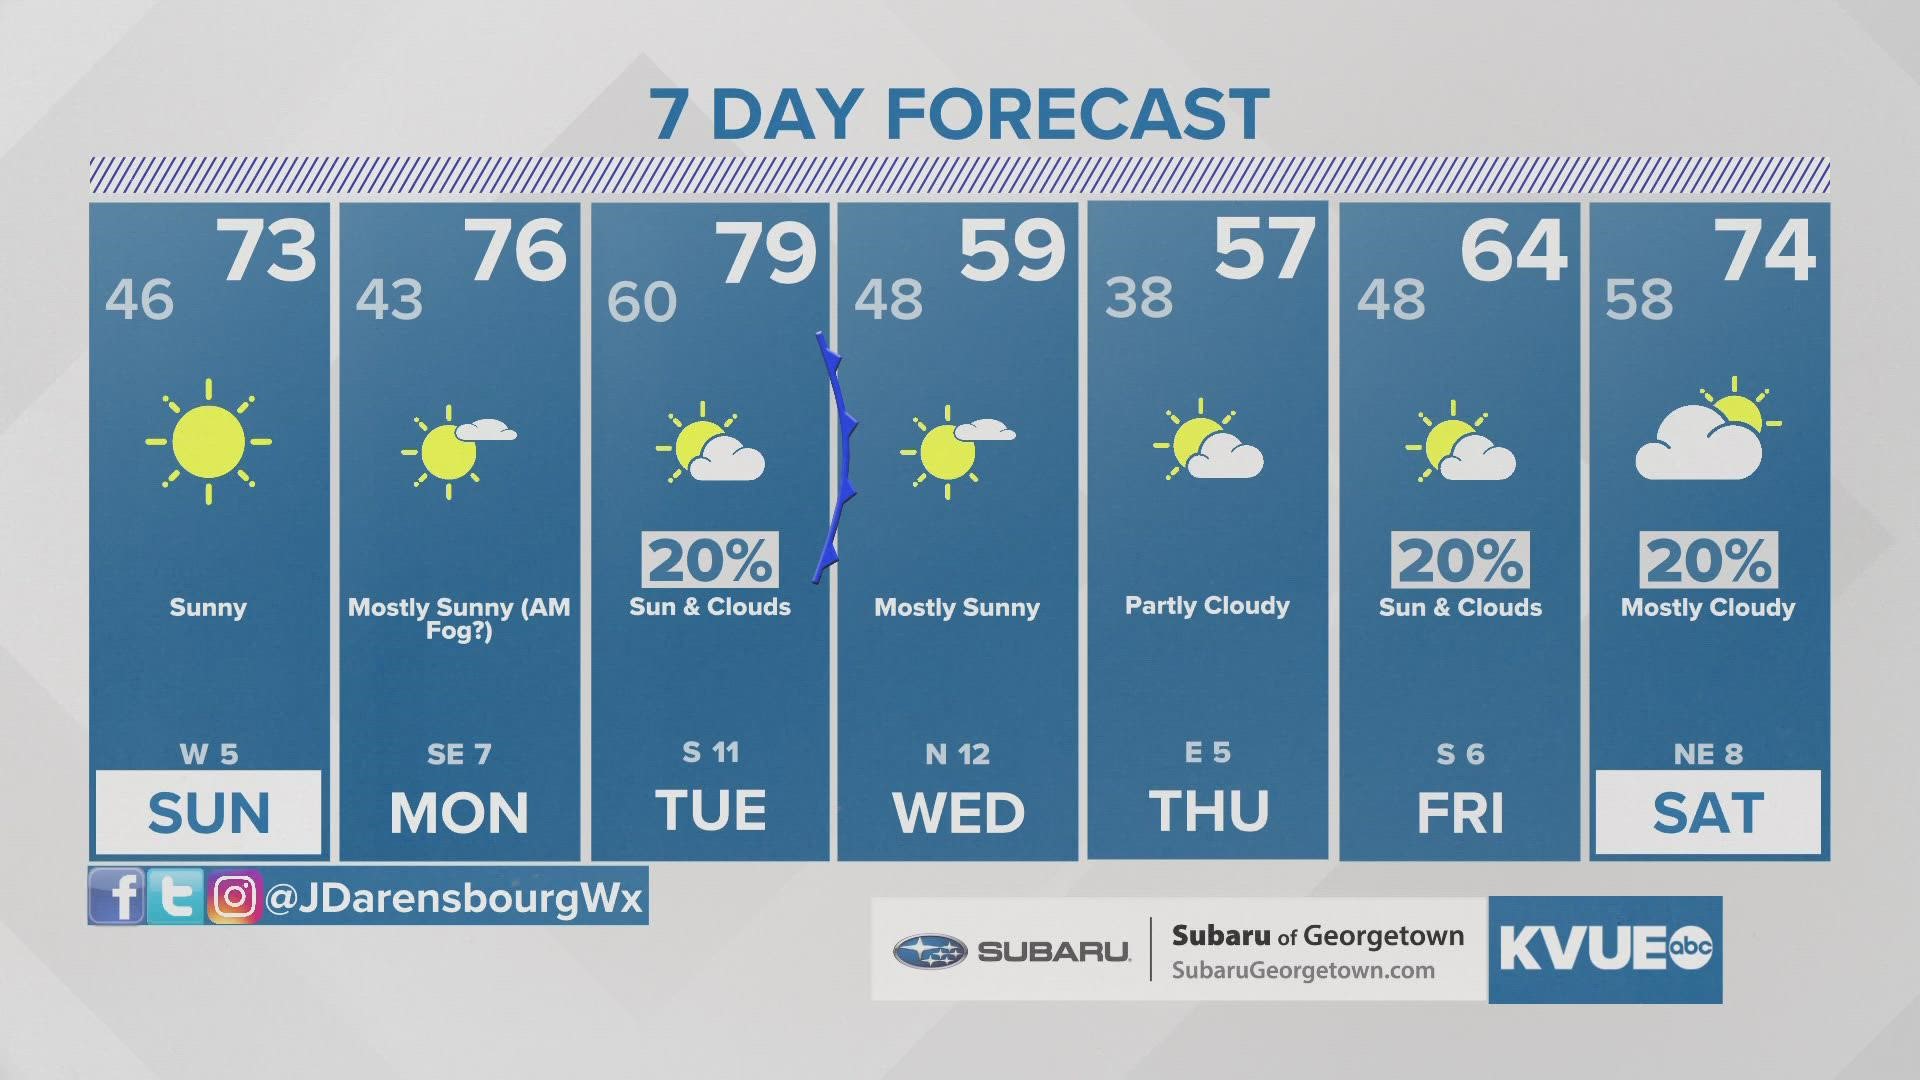 That good ol' Texas Temperature roller coaster: 70s to start next week, 50s for Wednesday and Thursday